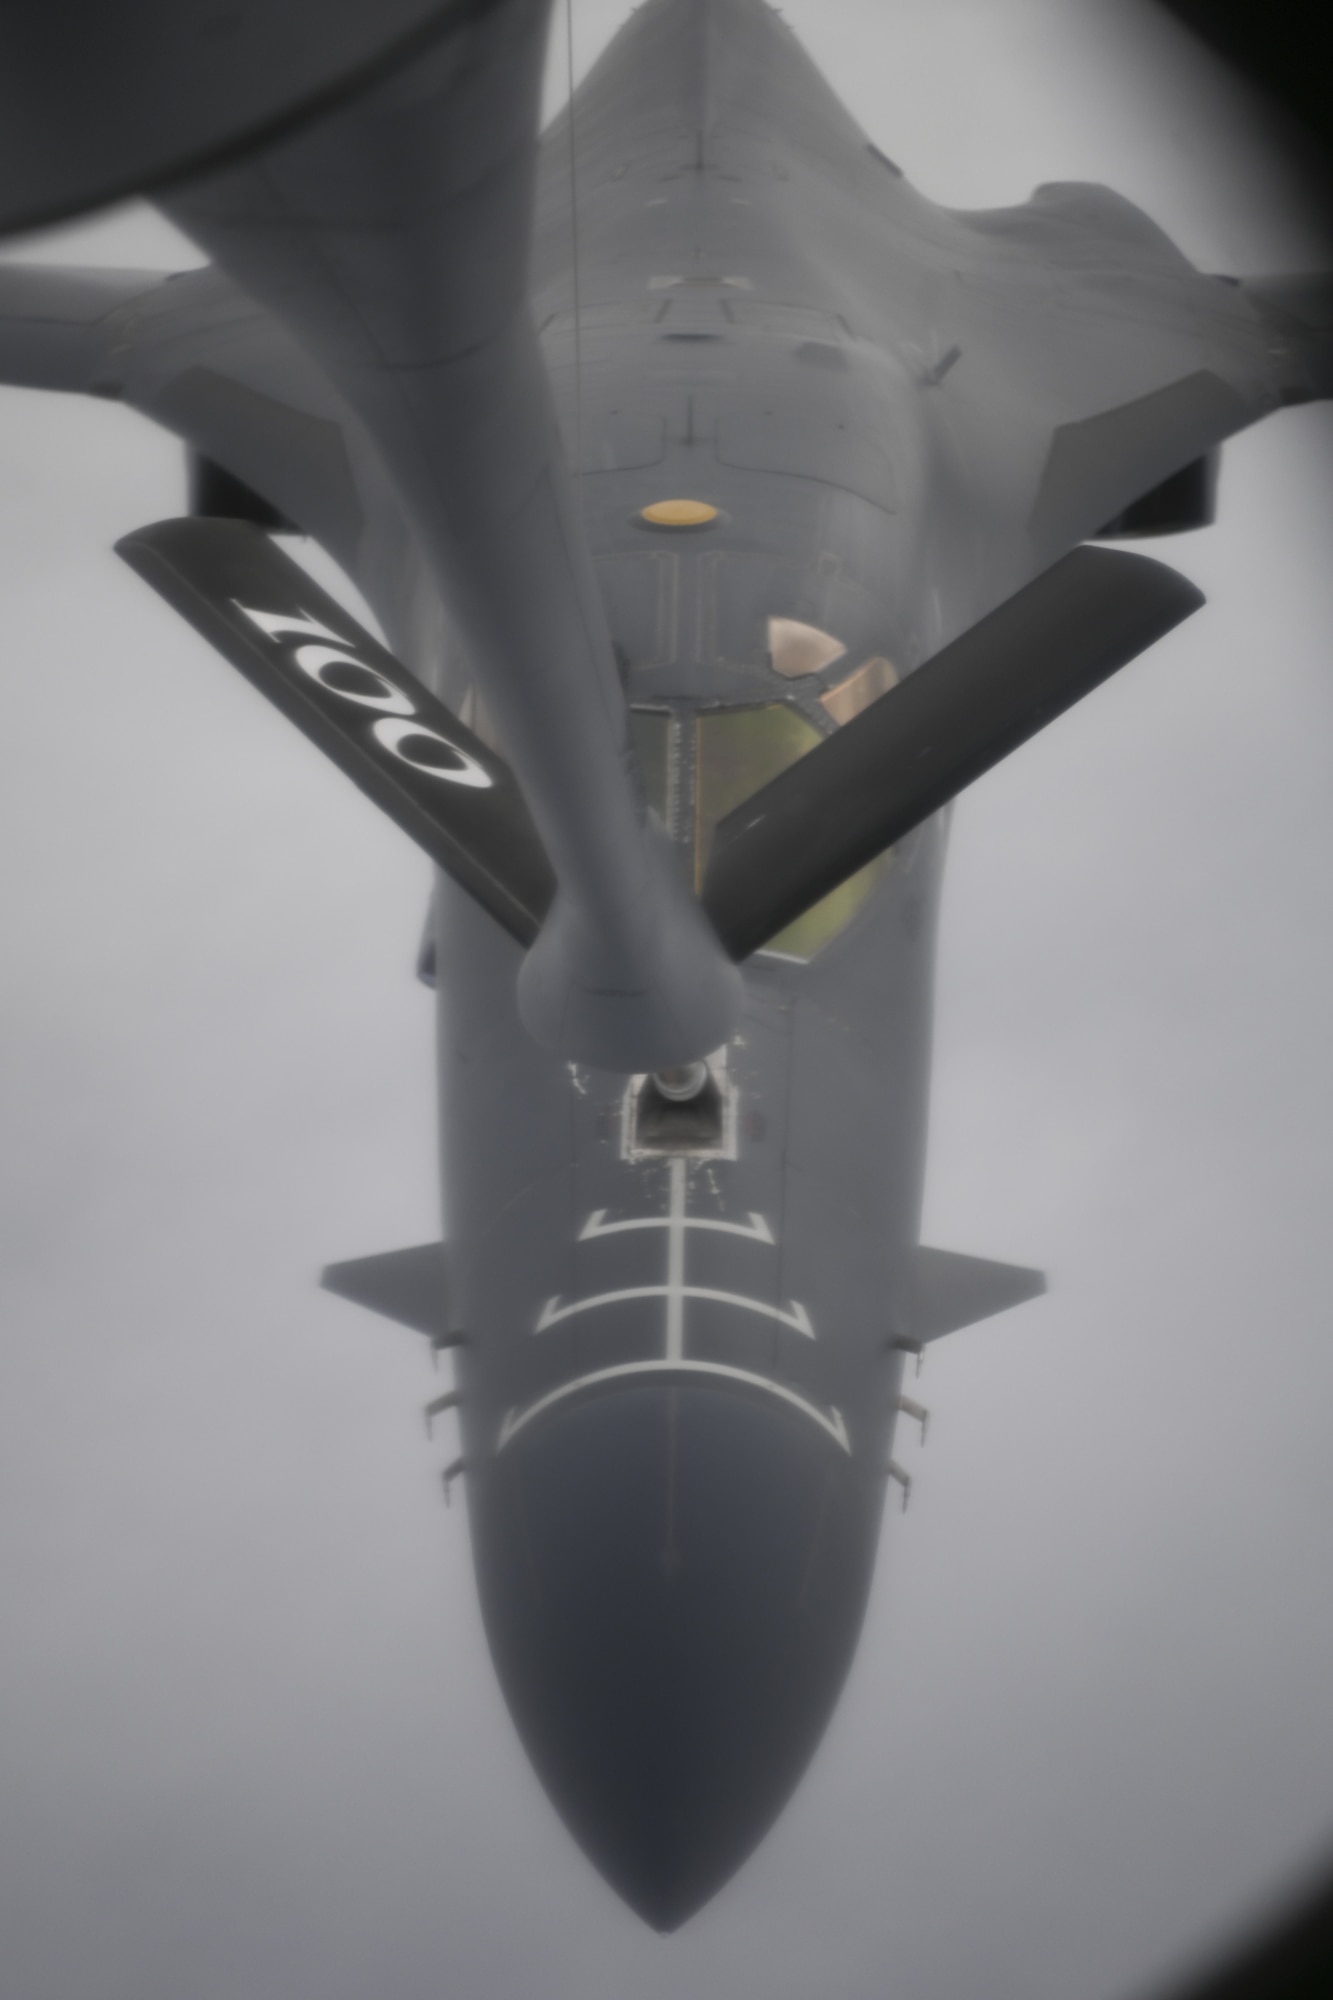 A 9th Expeditionary Bomb Squadron B-1B Lancer, deployed in support of Bomber Task Force Europe 22-1, receives fuel from a 100th Air Refueling Wing KC-135 Stratotanker enroute to a Black Sea maritime targeting training mission, Oct. 19, 2021. The Bomber Task Force Europe mission series requires a joint and coalition force to support strategic bomber deployments within the European theater, which amplifies readiness and promotes interoperability between rotational bomber aircrew, NATO allies, and coalition partners.